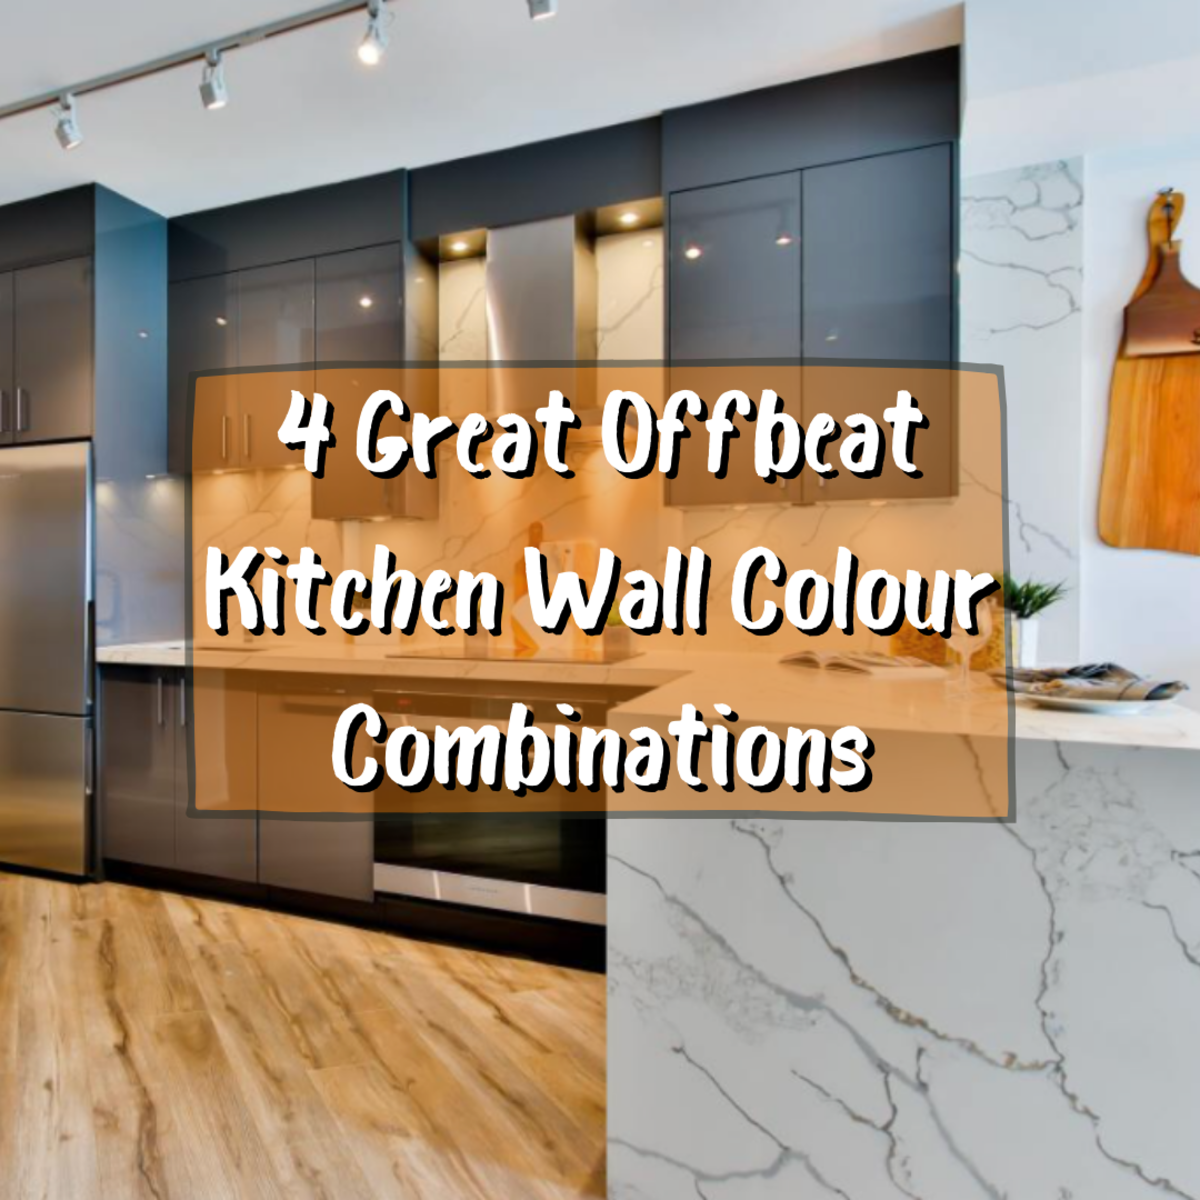 4 Great Offbeat Kitchen Wall Colour Combinations